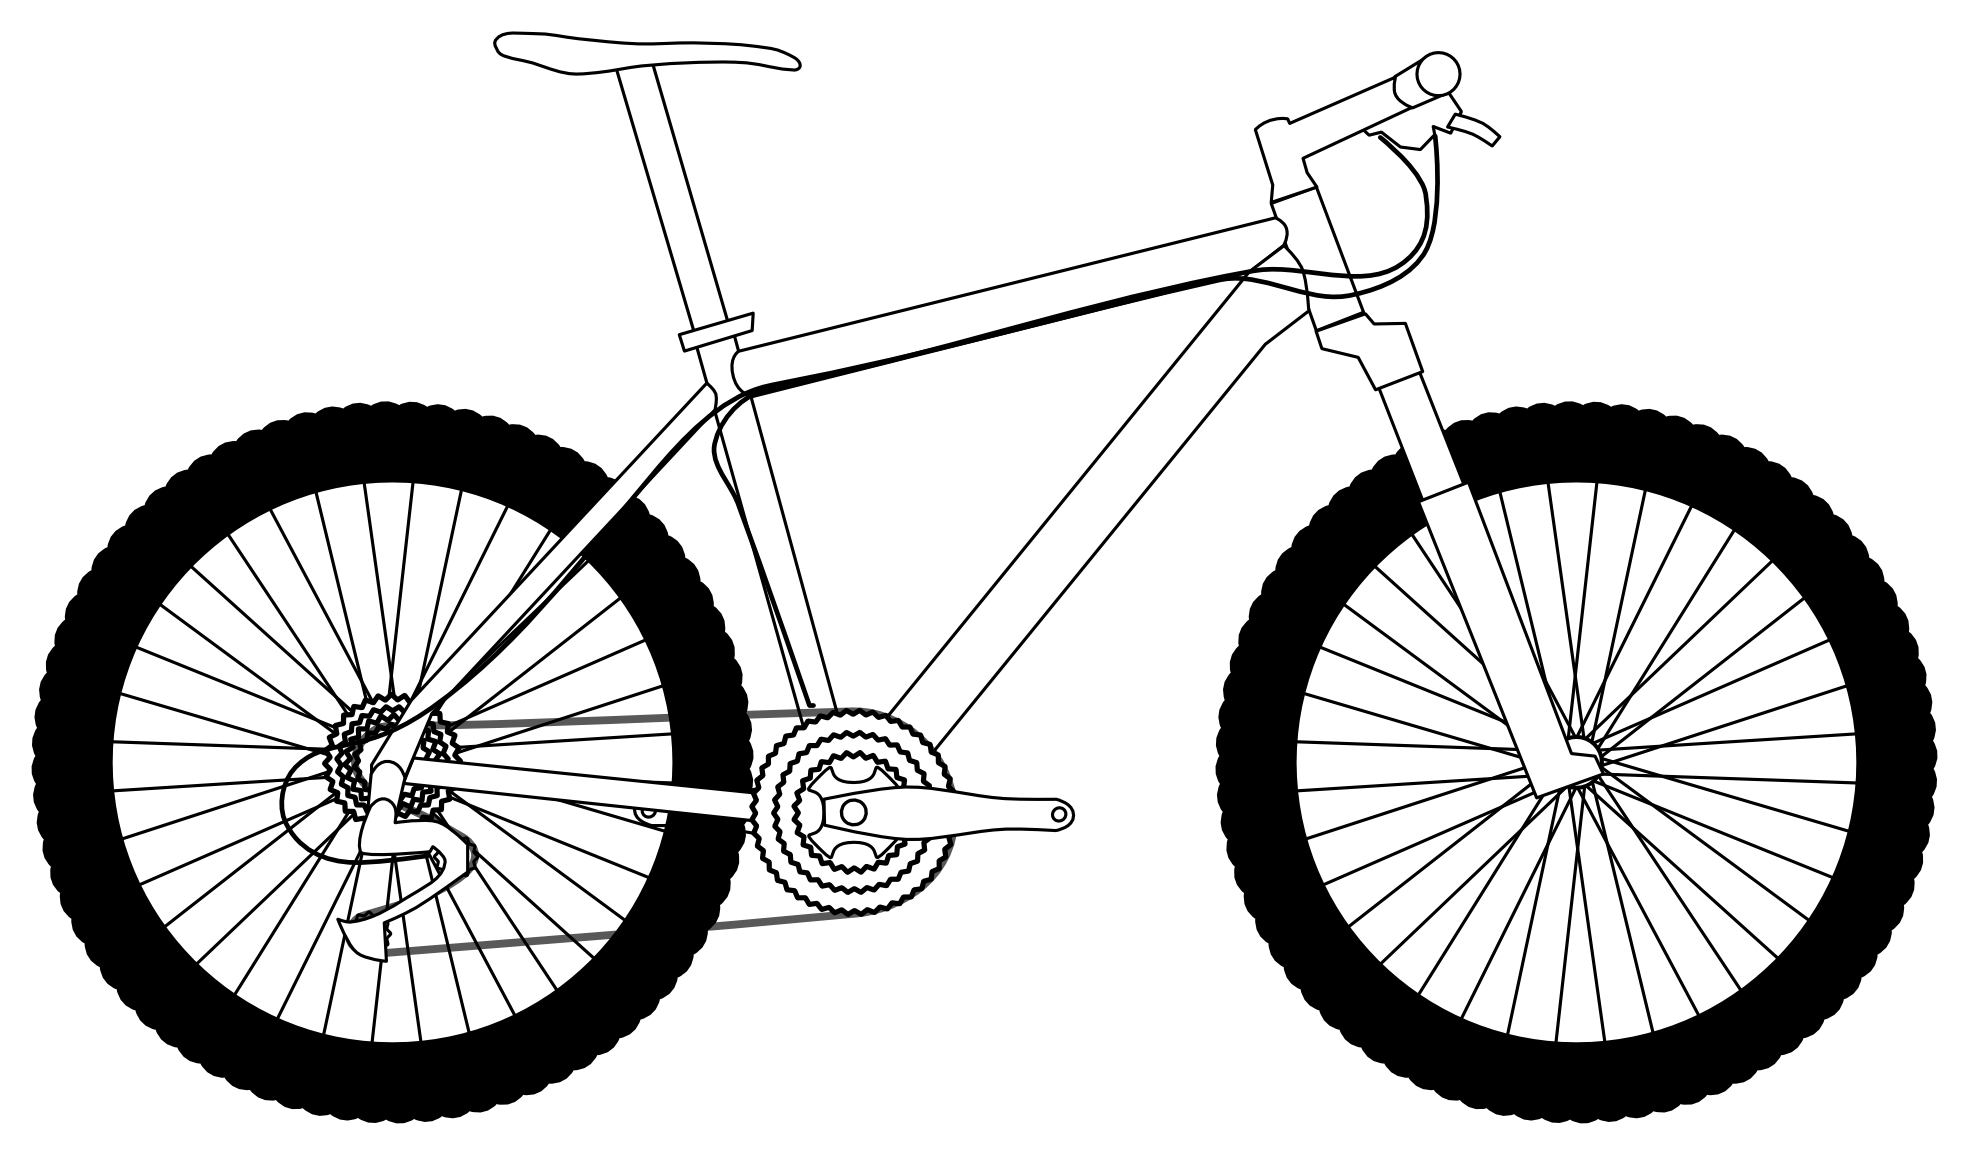 Cycle clipart rode. Mountain bike drawing at